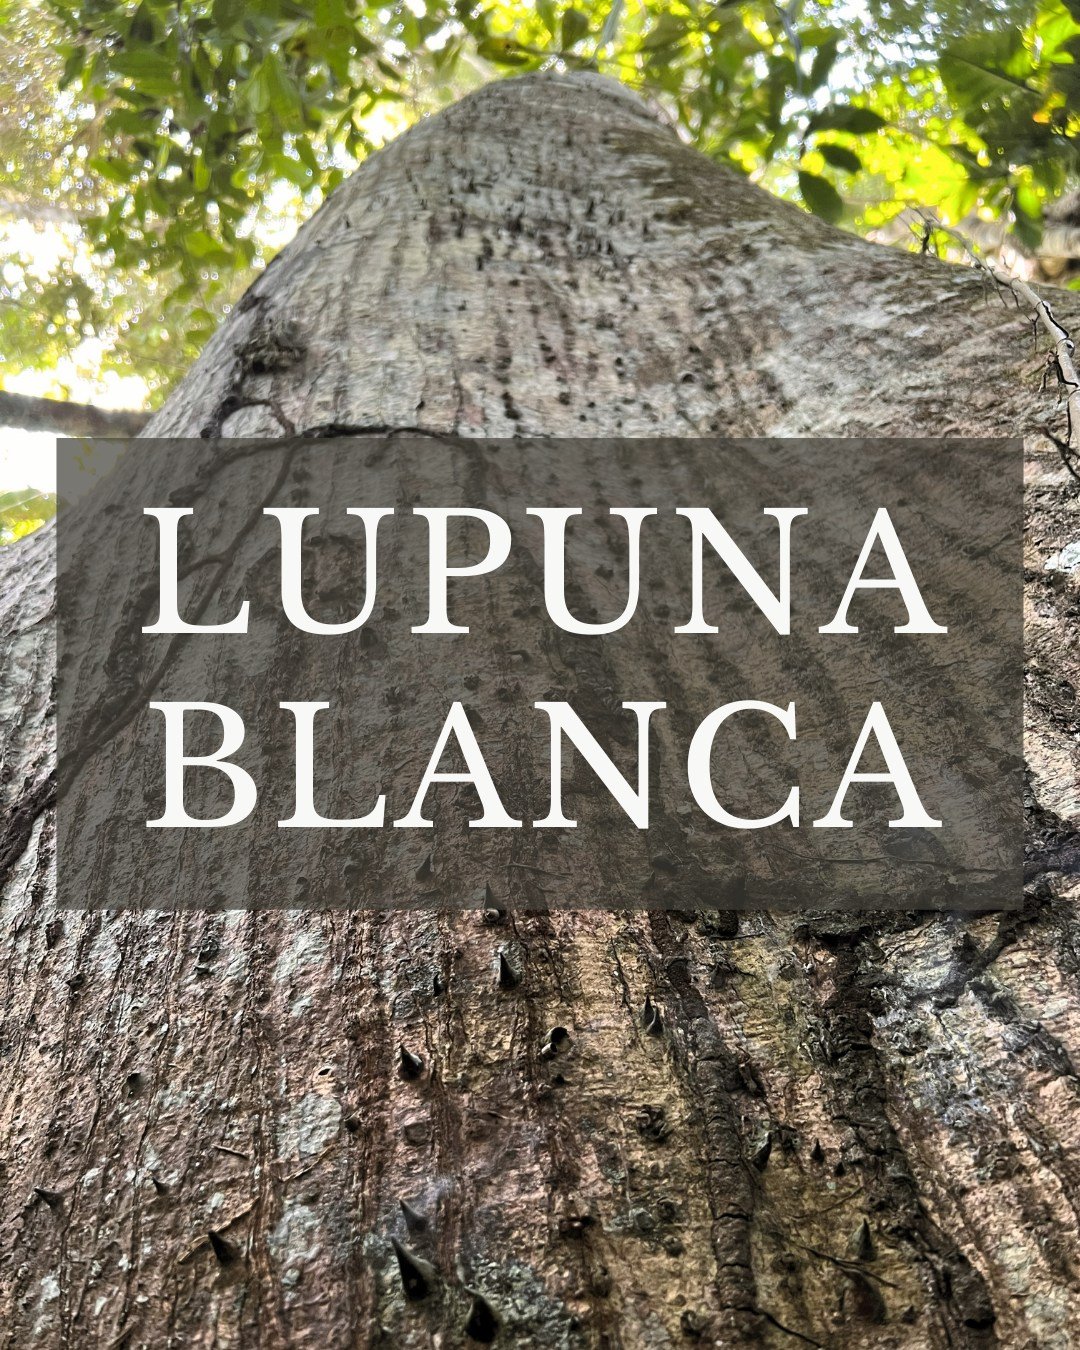 #lupuna medicine🌳

Such a reliable, stable, honored plant. They evoke a sense of sacredness, in their physical and spiritual forms. Many cultures from around the world have regarded varieties of Lupuna (from the Ceiba genus) as sacred. Indeed they a